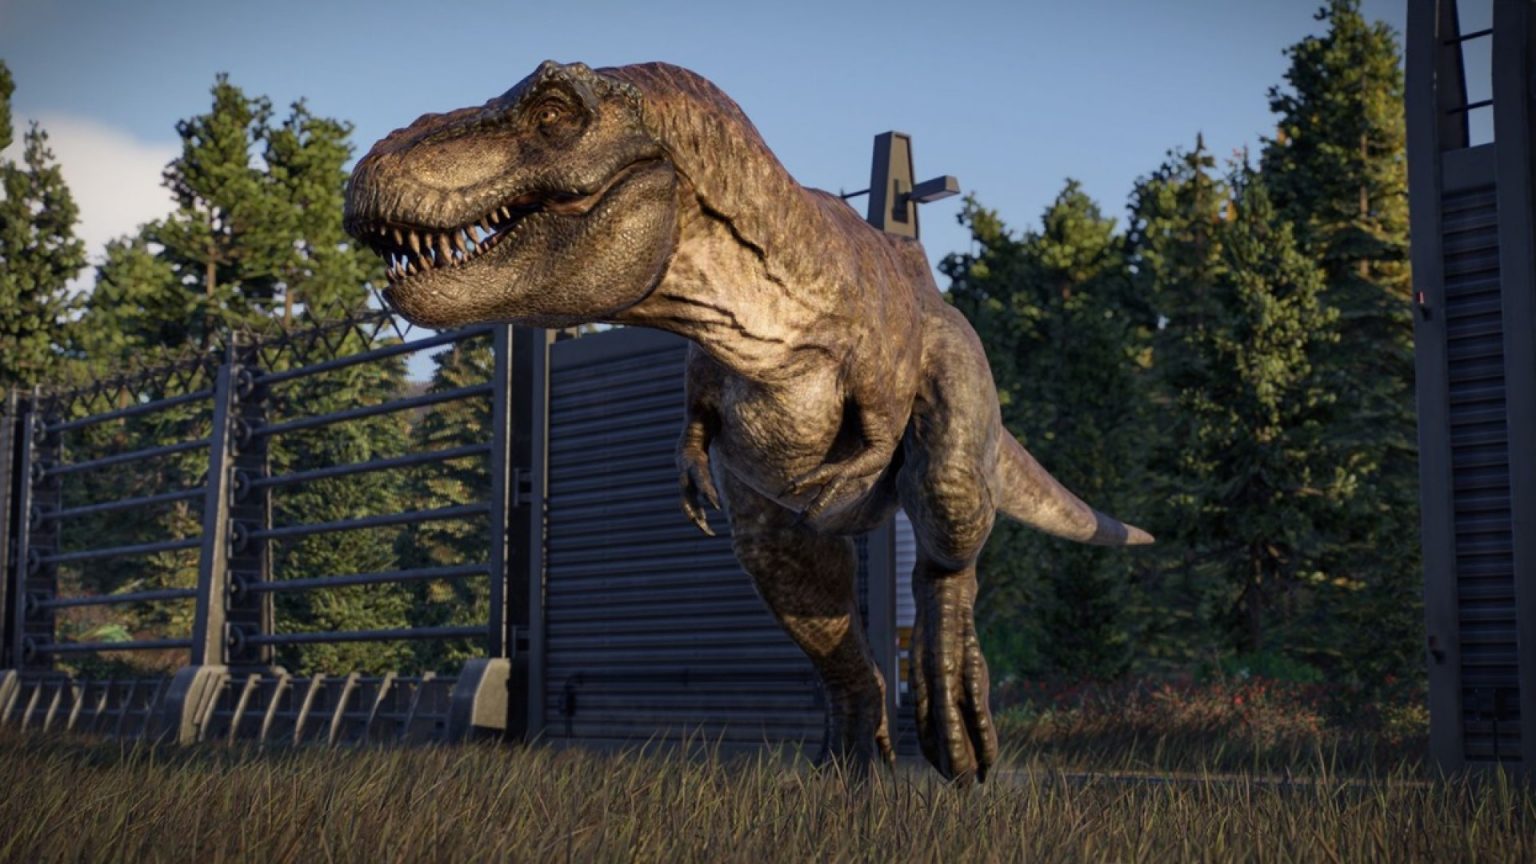 Jurassic World Evolution 2 Dev Diary Talks About New Biomes Dinos Gameplay Improvements And More